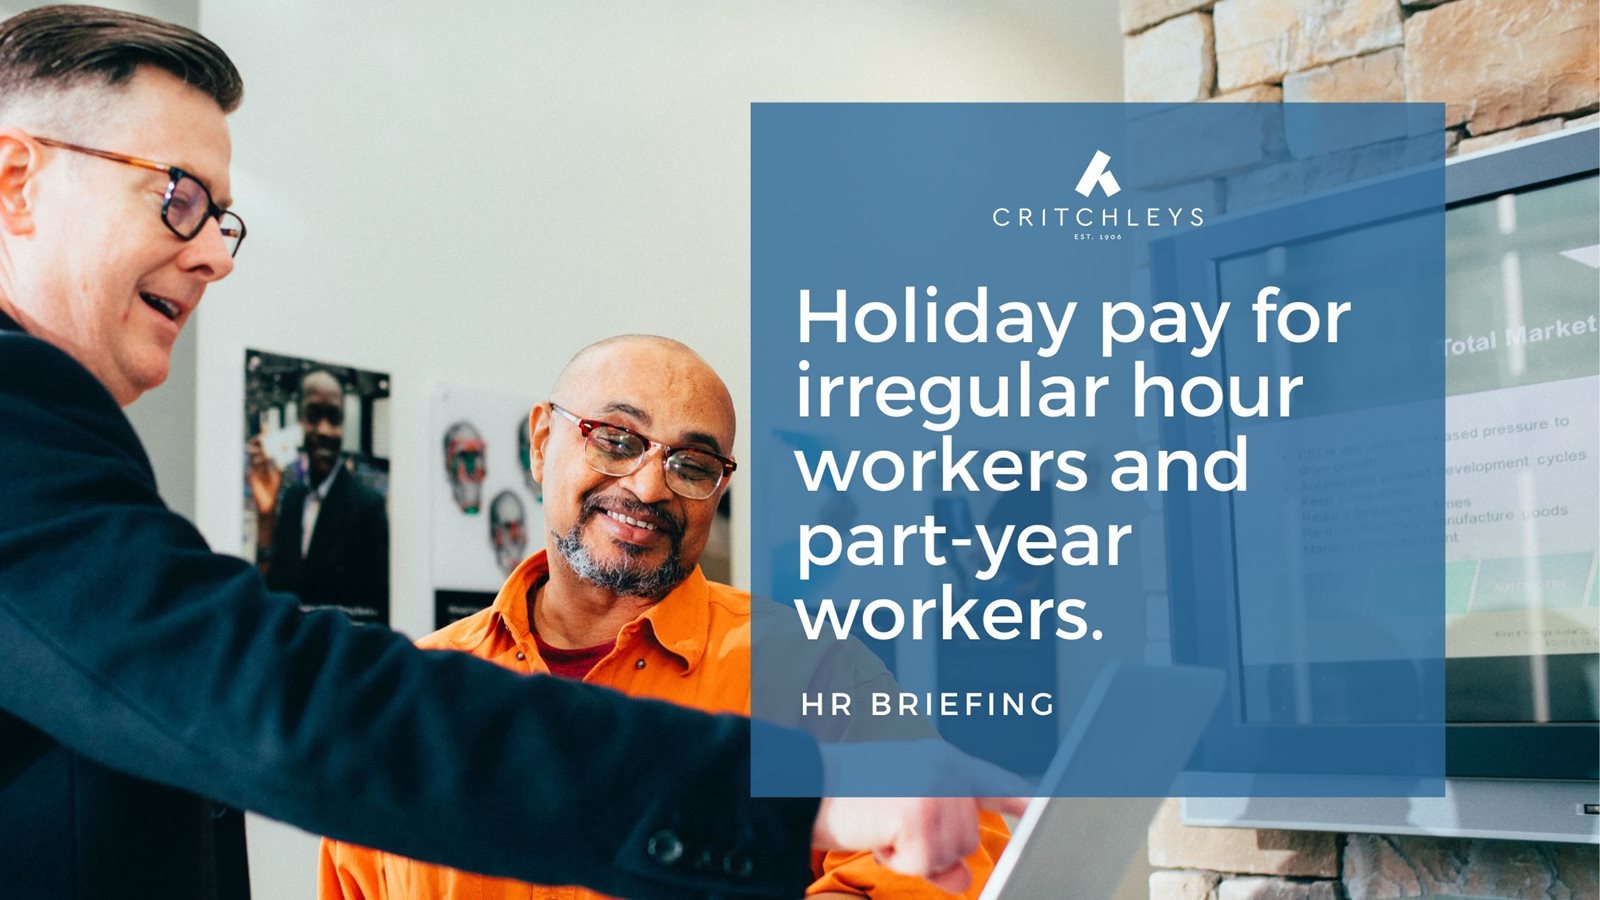 Important-Employment Law Update - Holiday pay for irregular hour workers and part-year workers